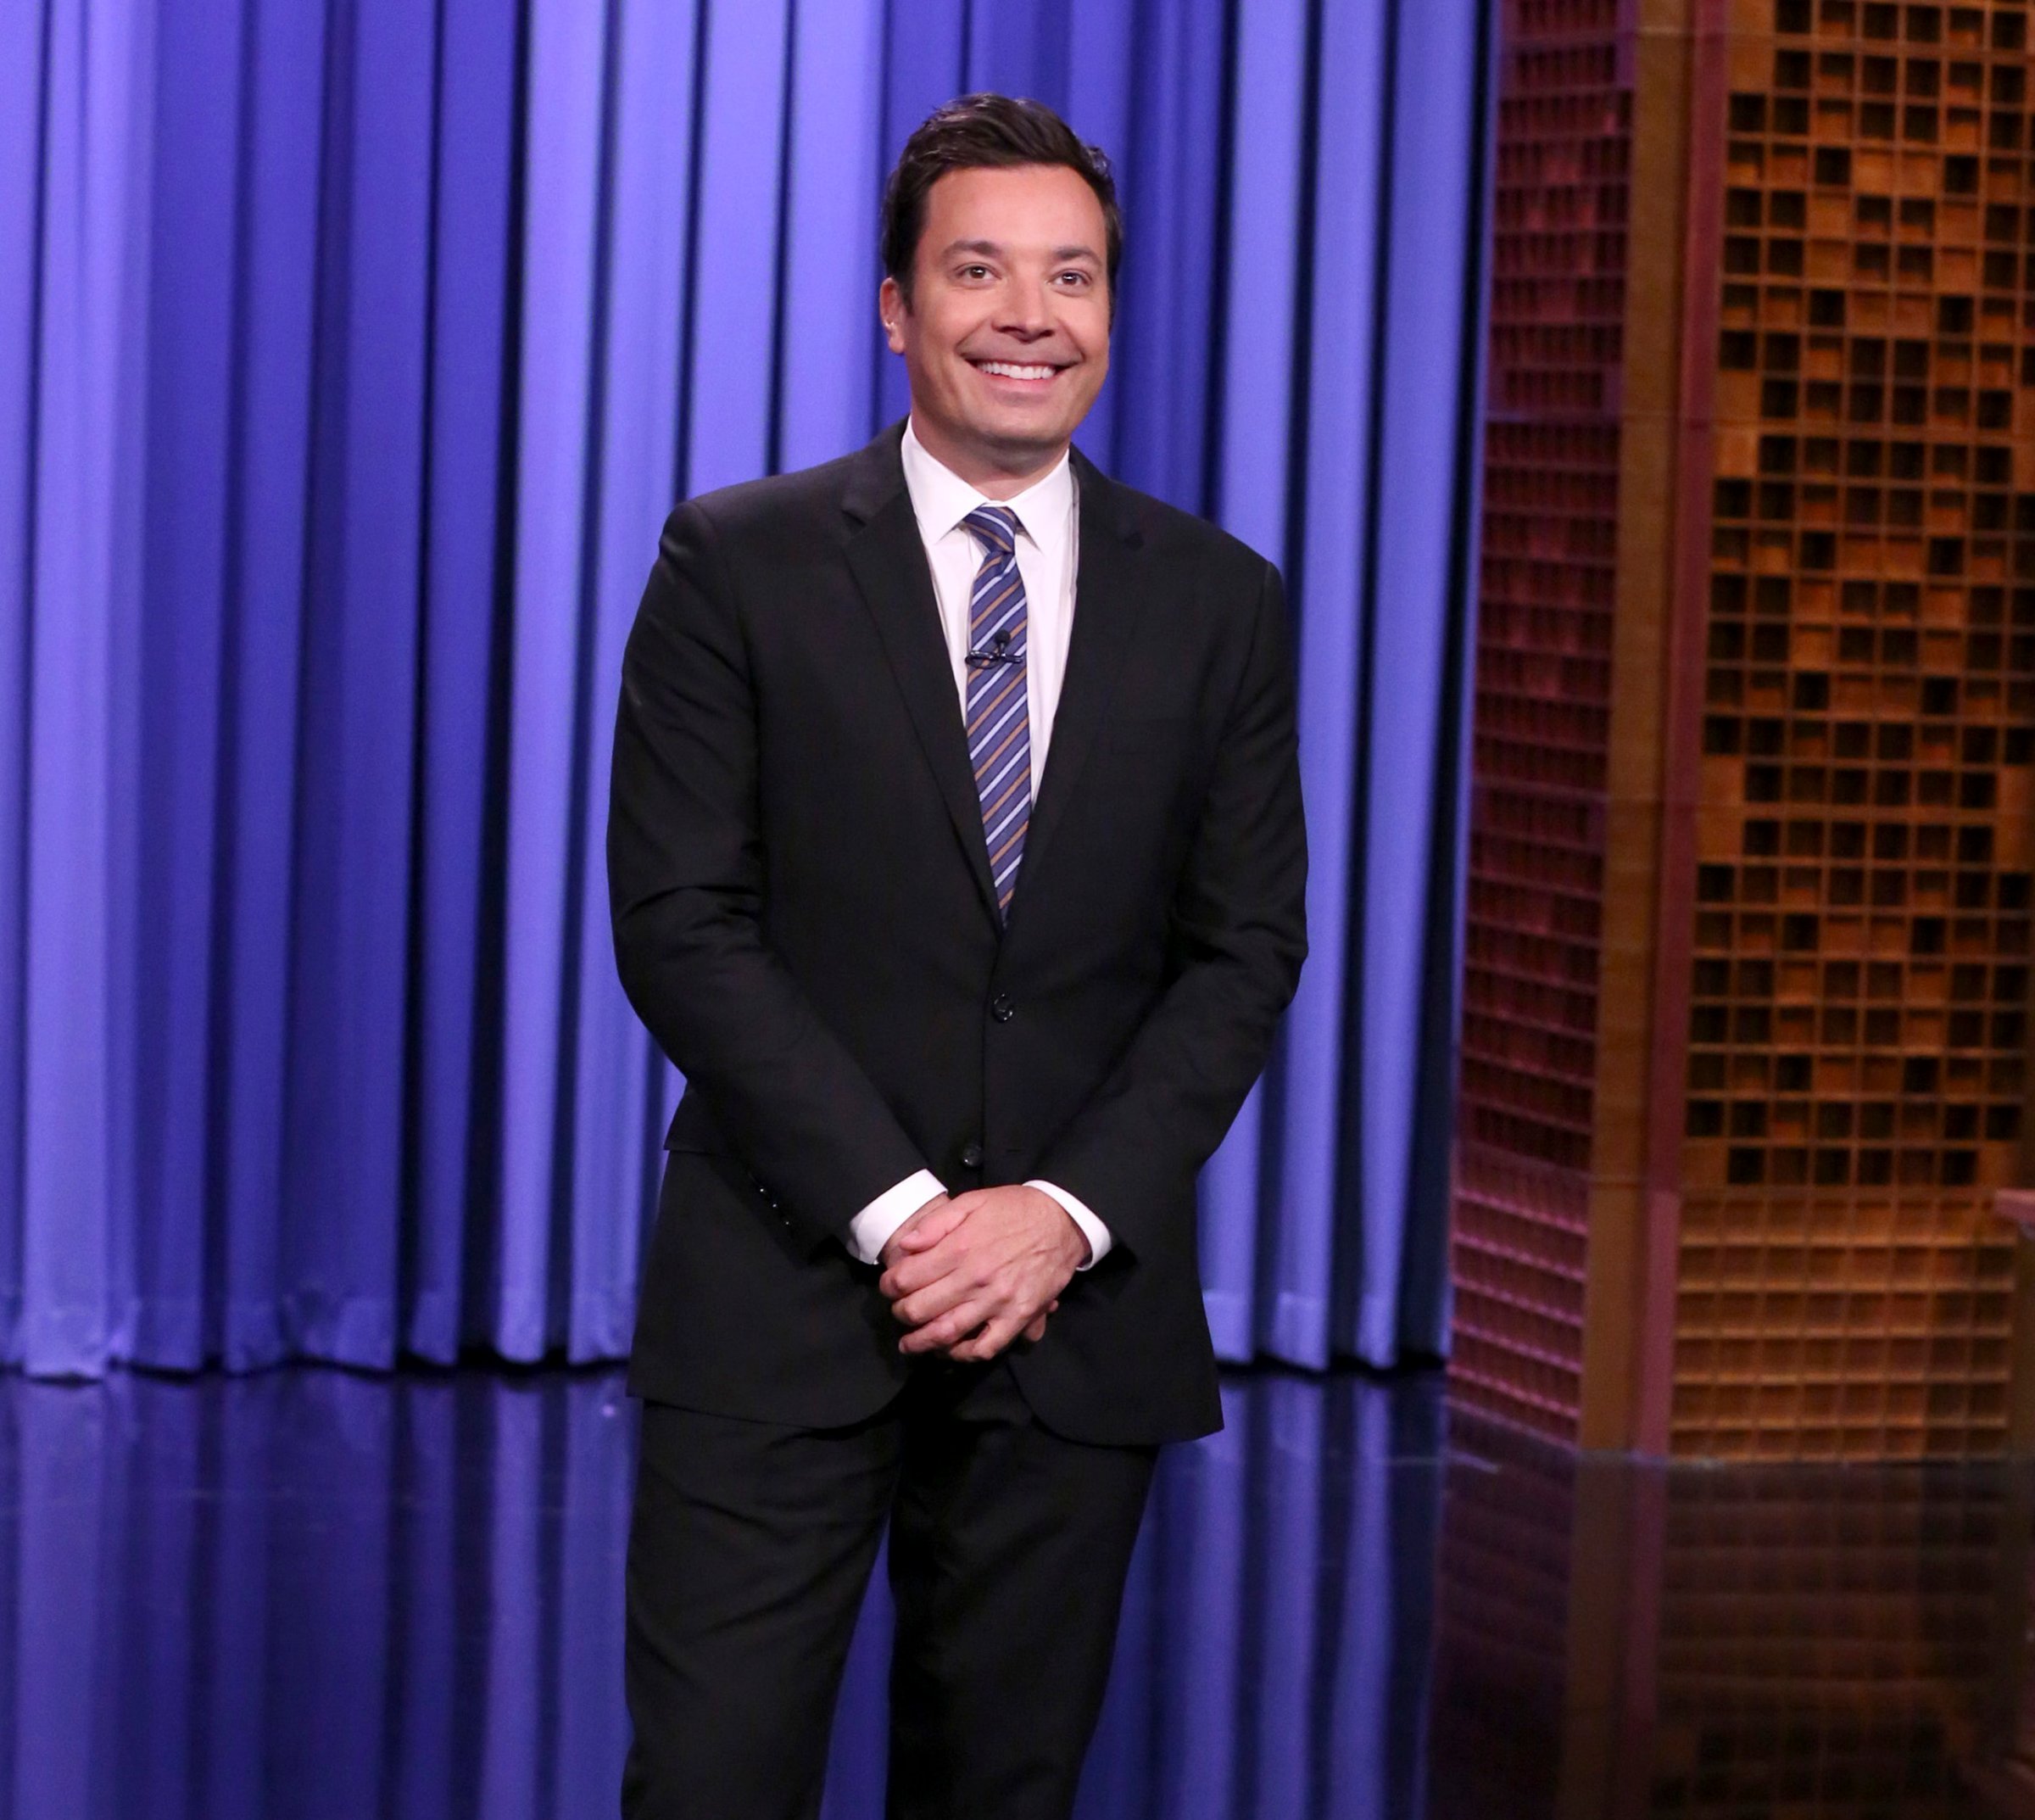 Host Jimmy Fallon during the monologue on July 14, 2016.